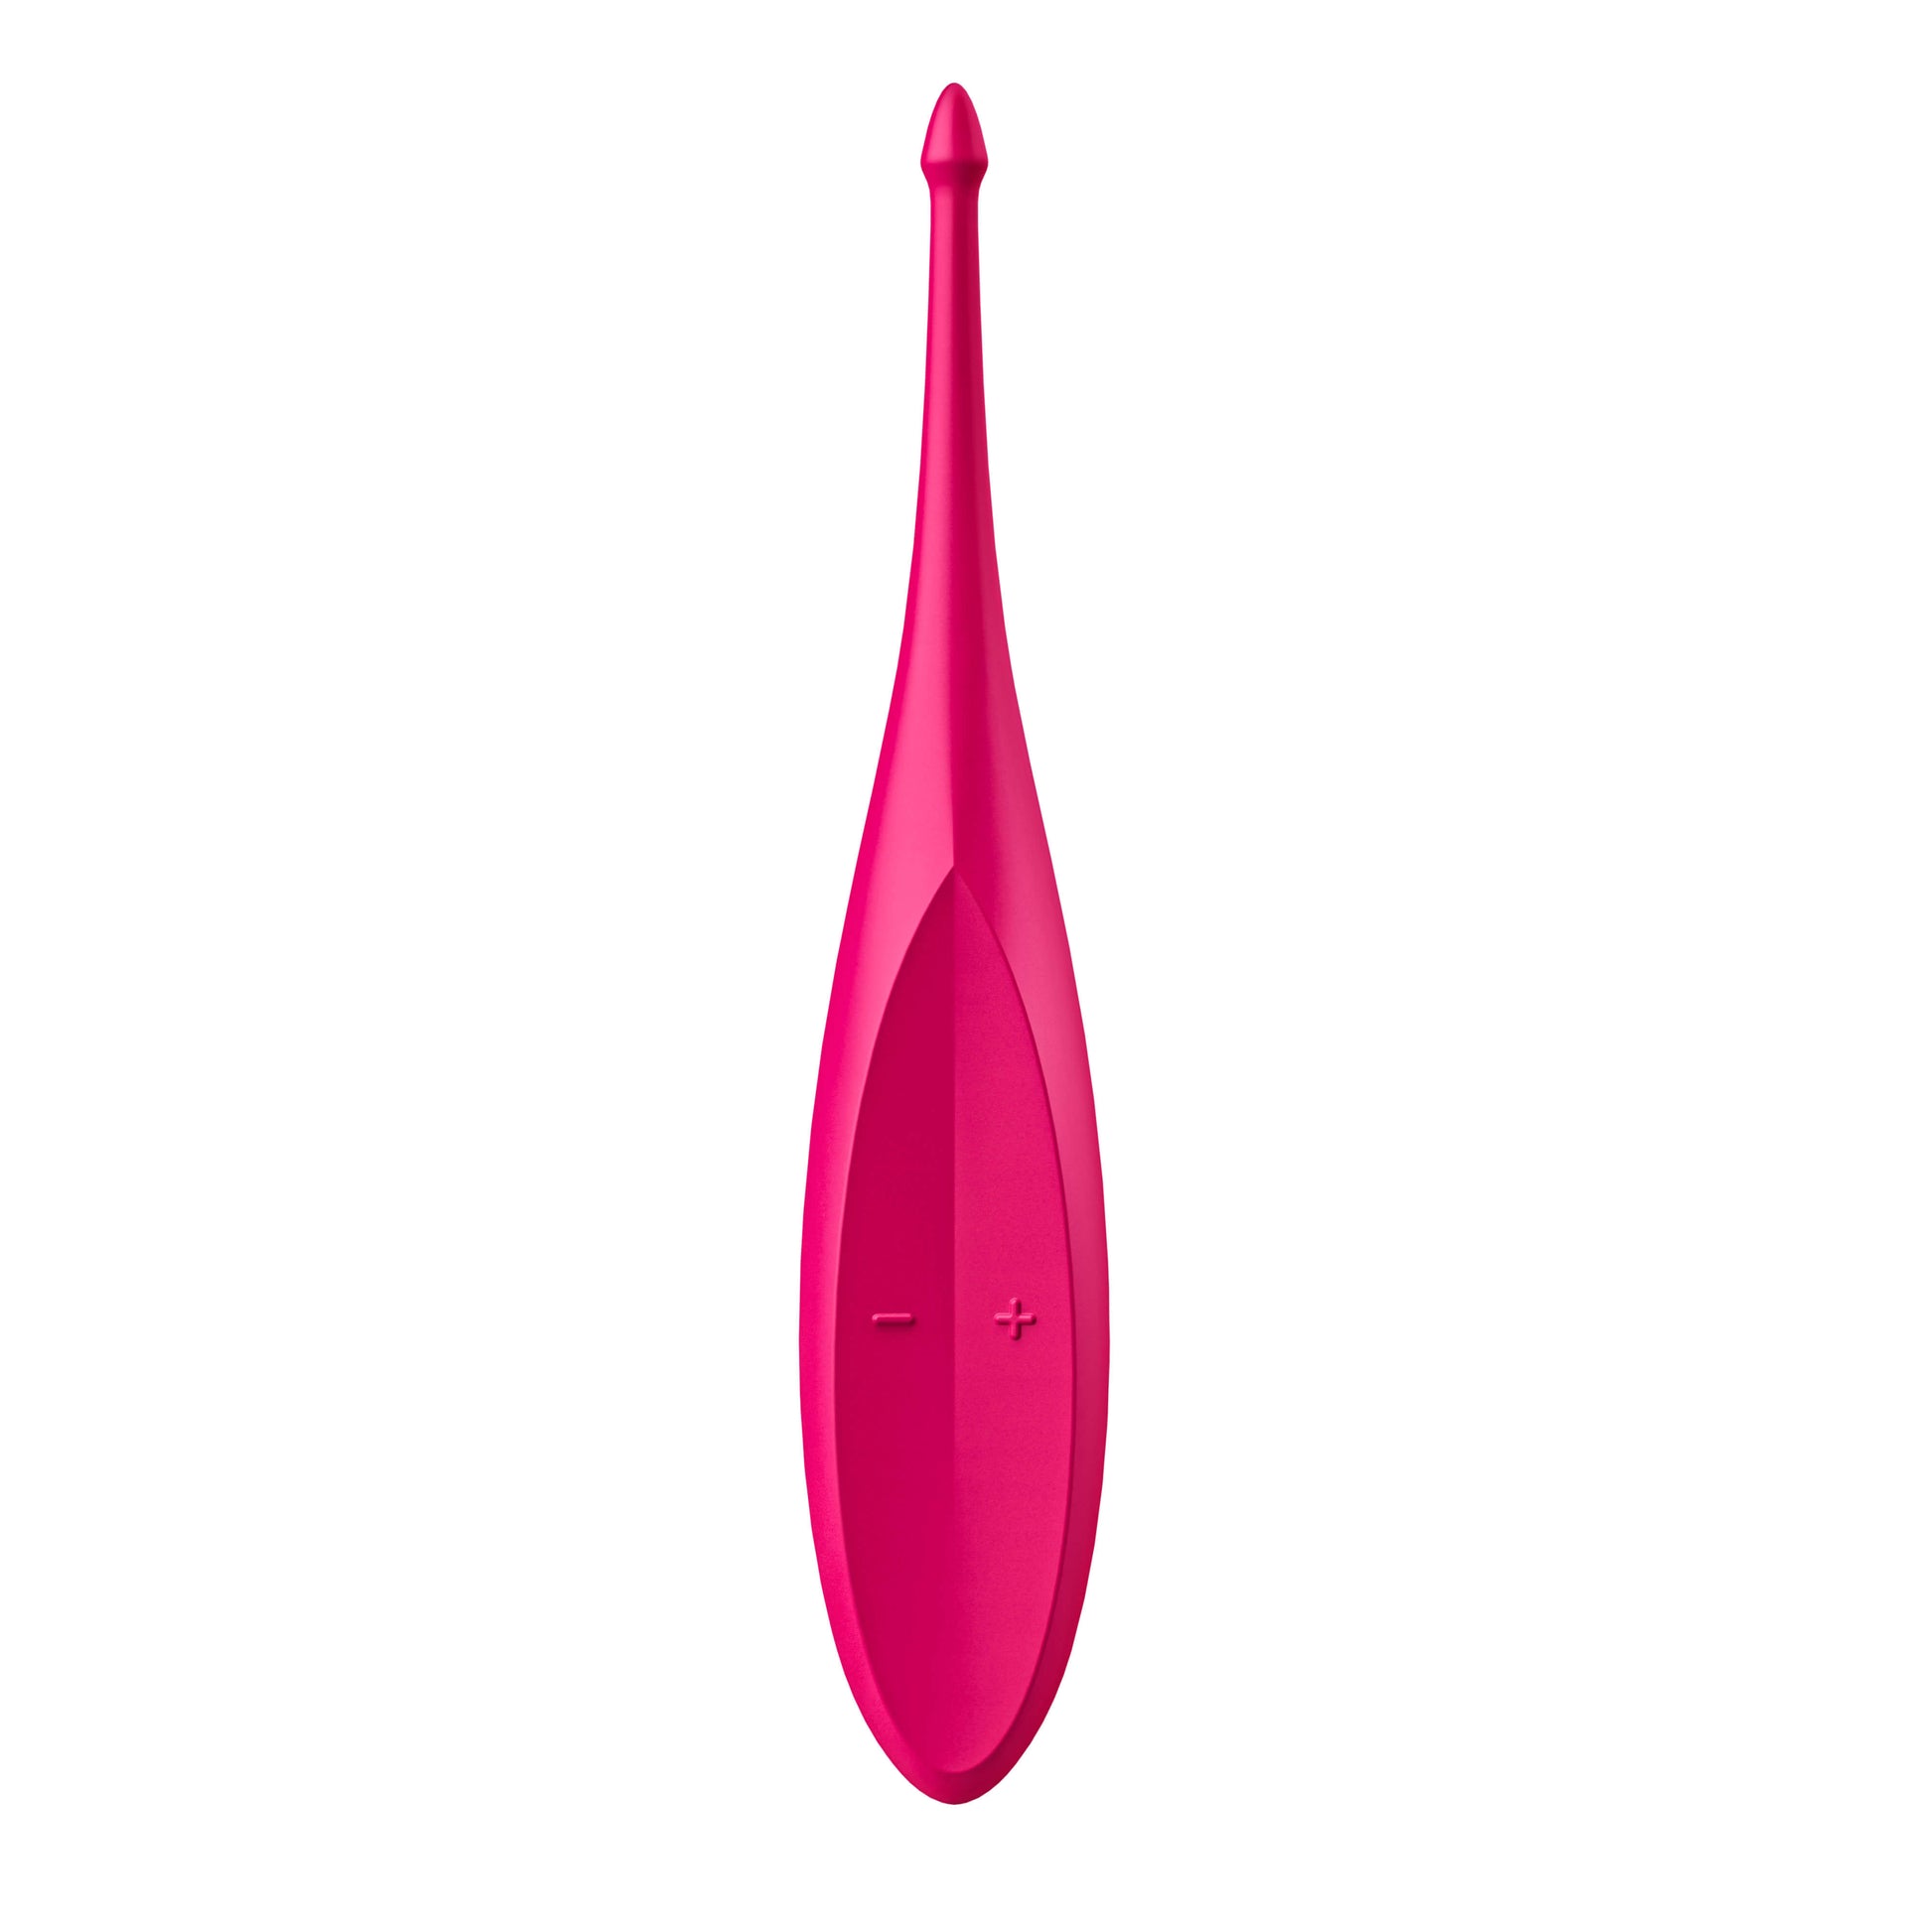 Satisfyer Twirling Fun - by The Bigger O an online sex toy shop. We ship to USA, Canada and the UK.